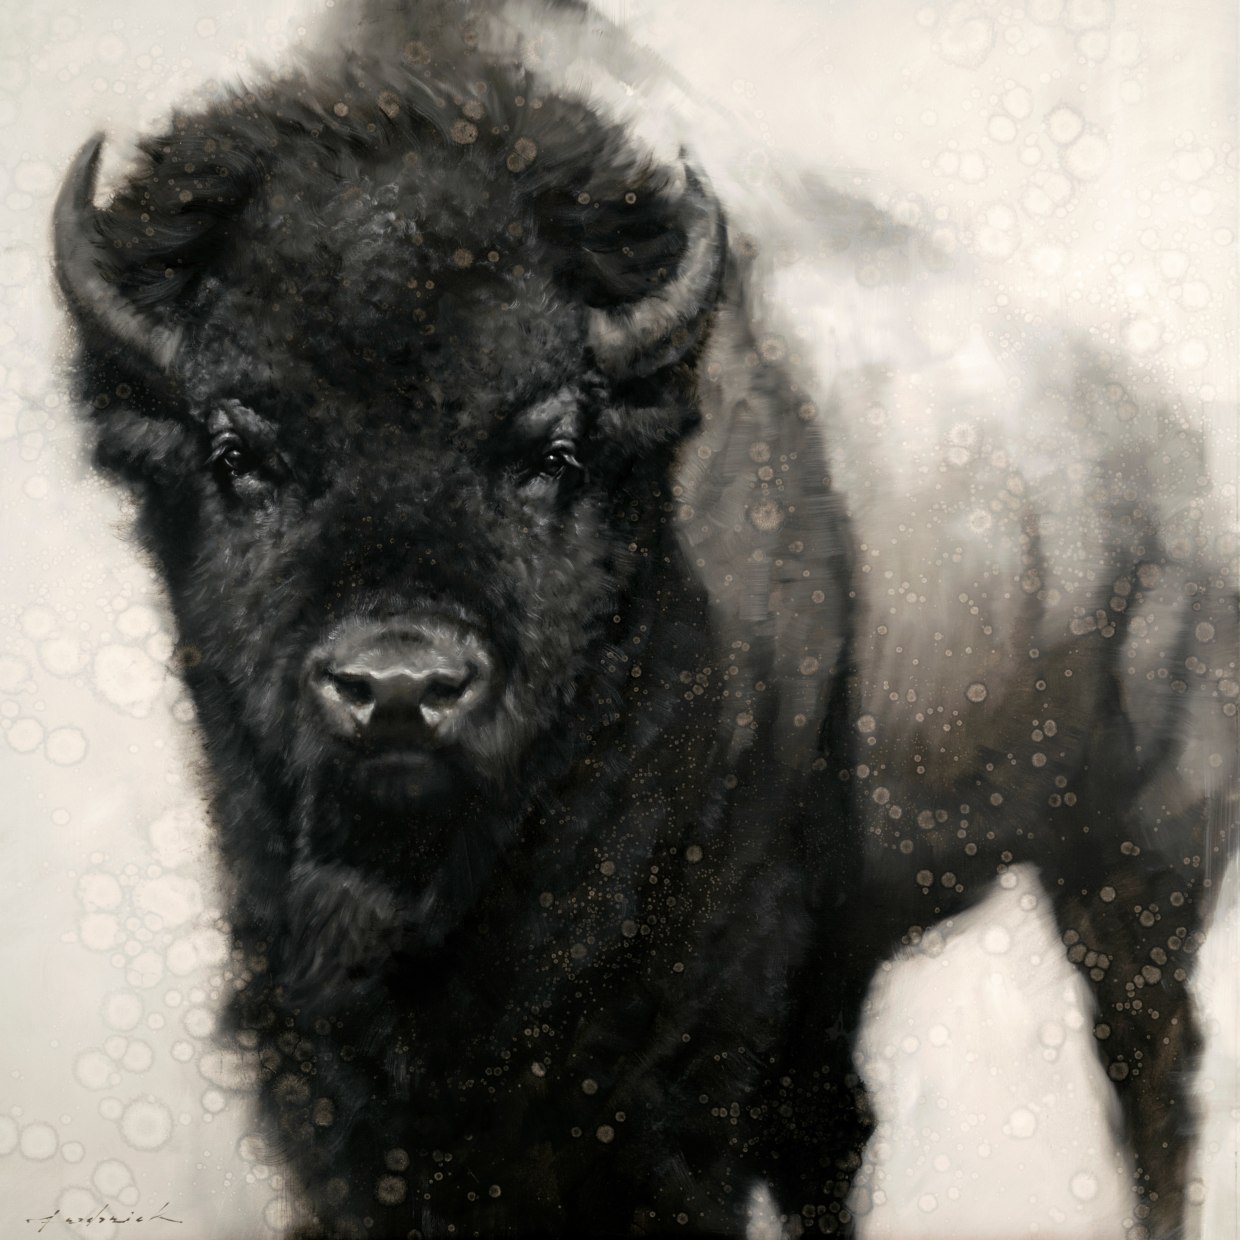 David Frederick Riley | Bison and Wolves and Bears, Oh My: An Exploration of Expression